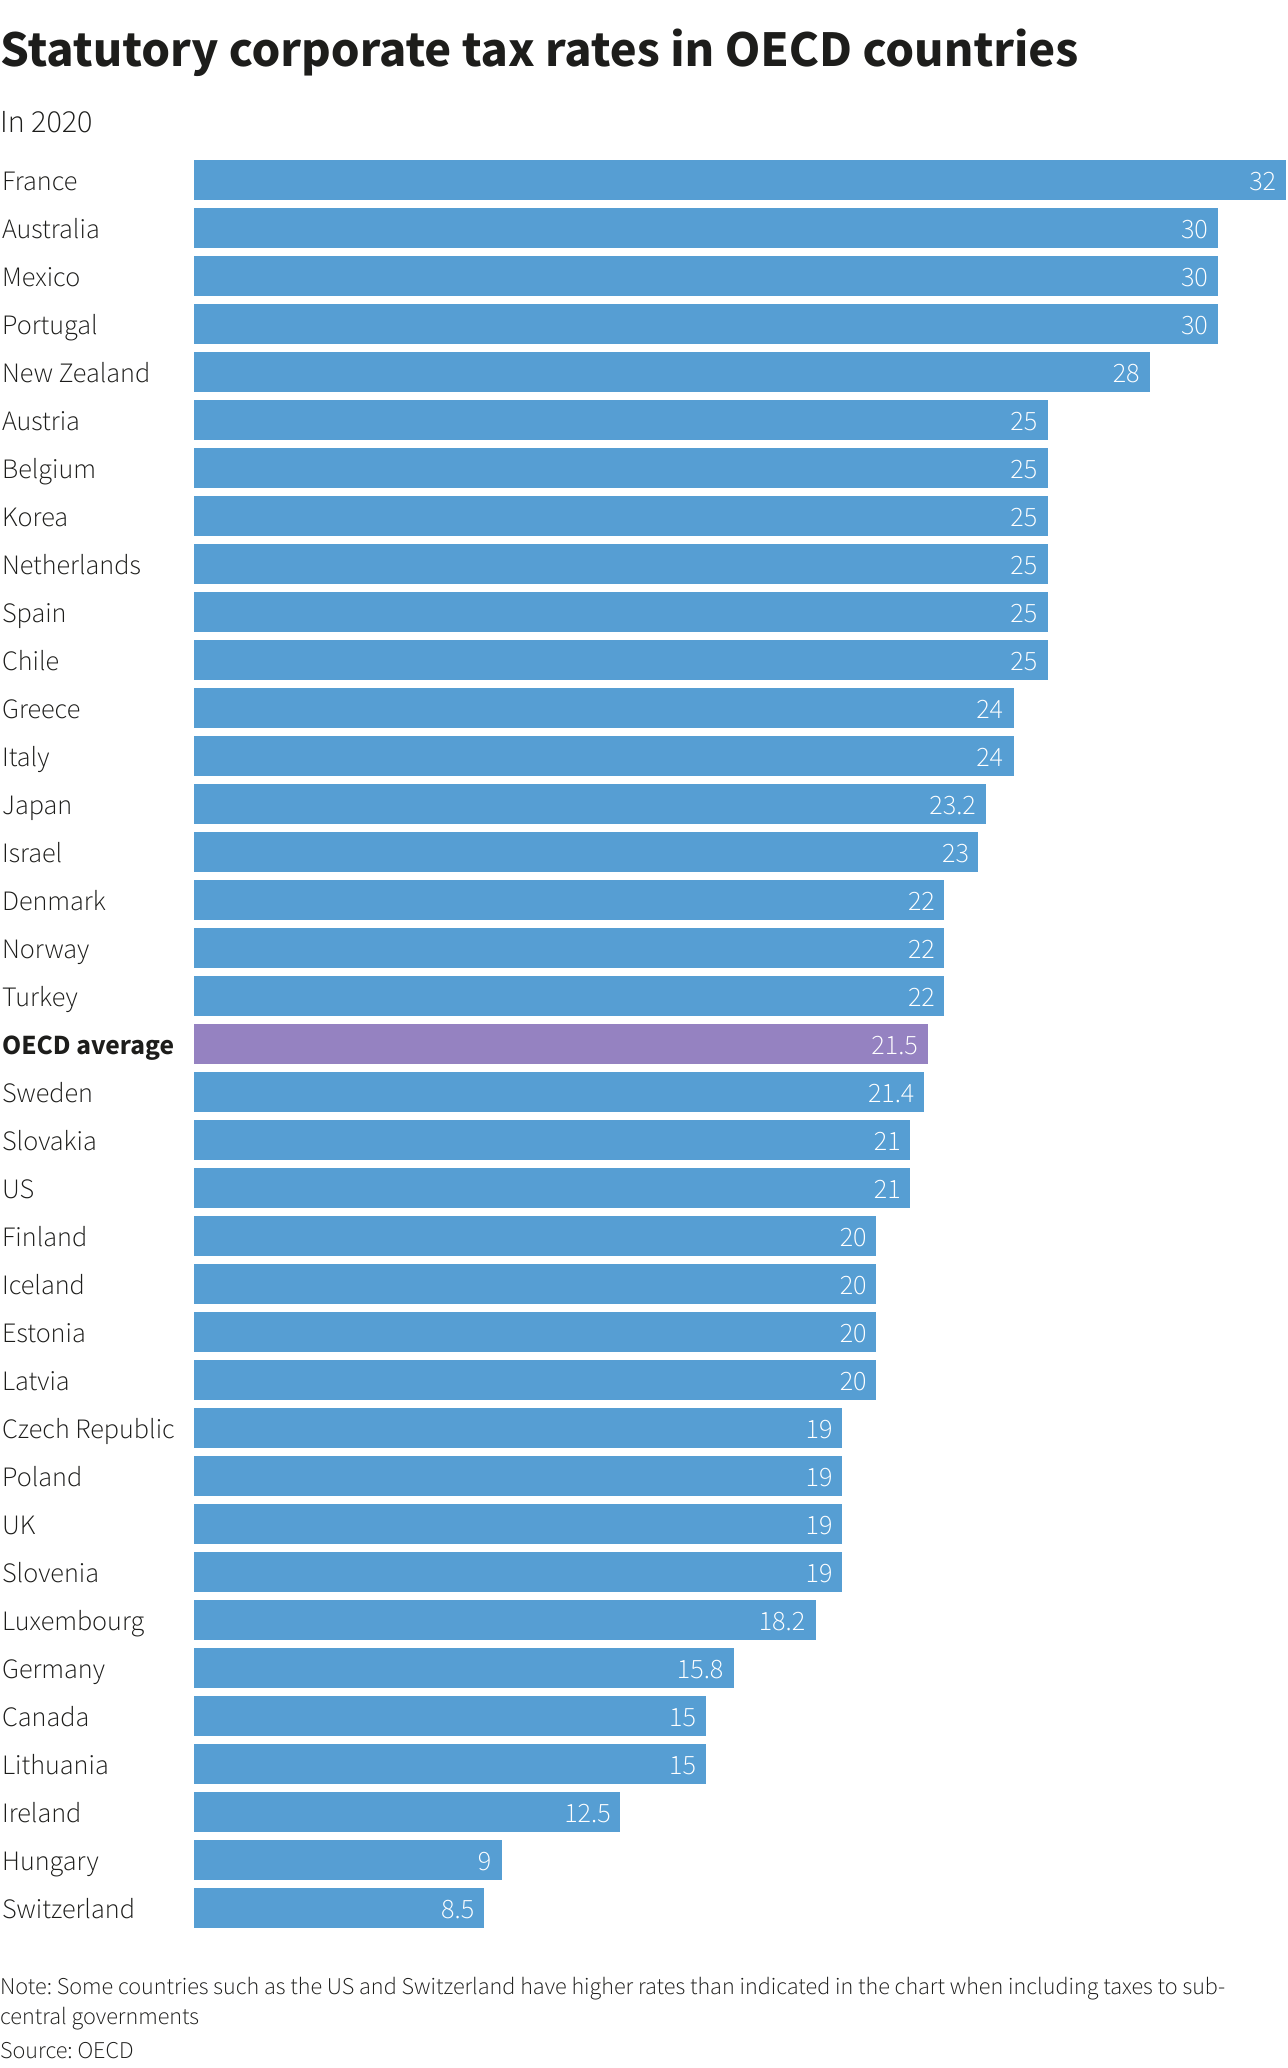 Statutory corporate tax rates in OECD countries